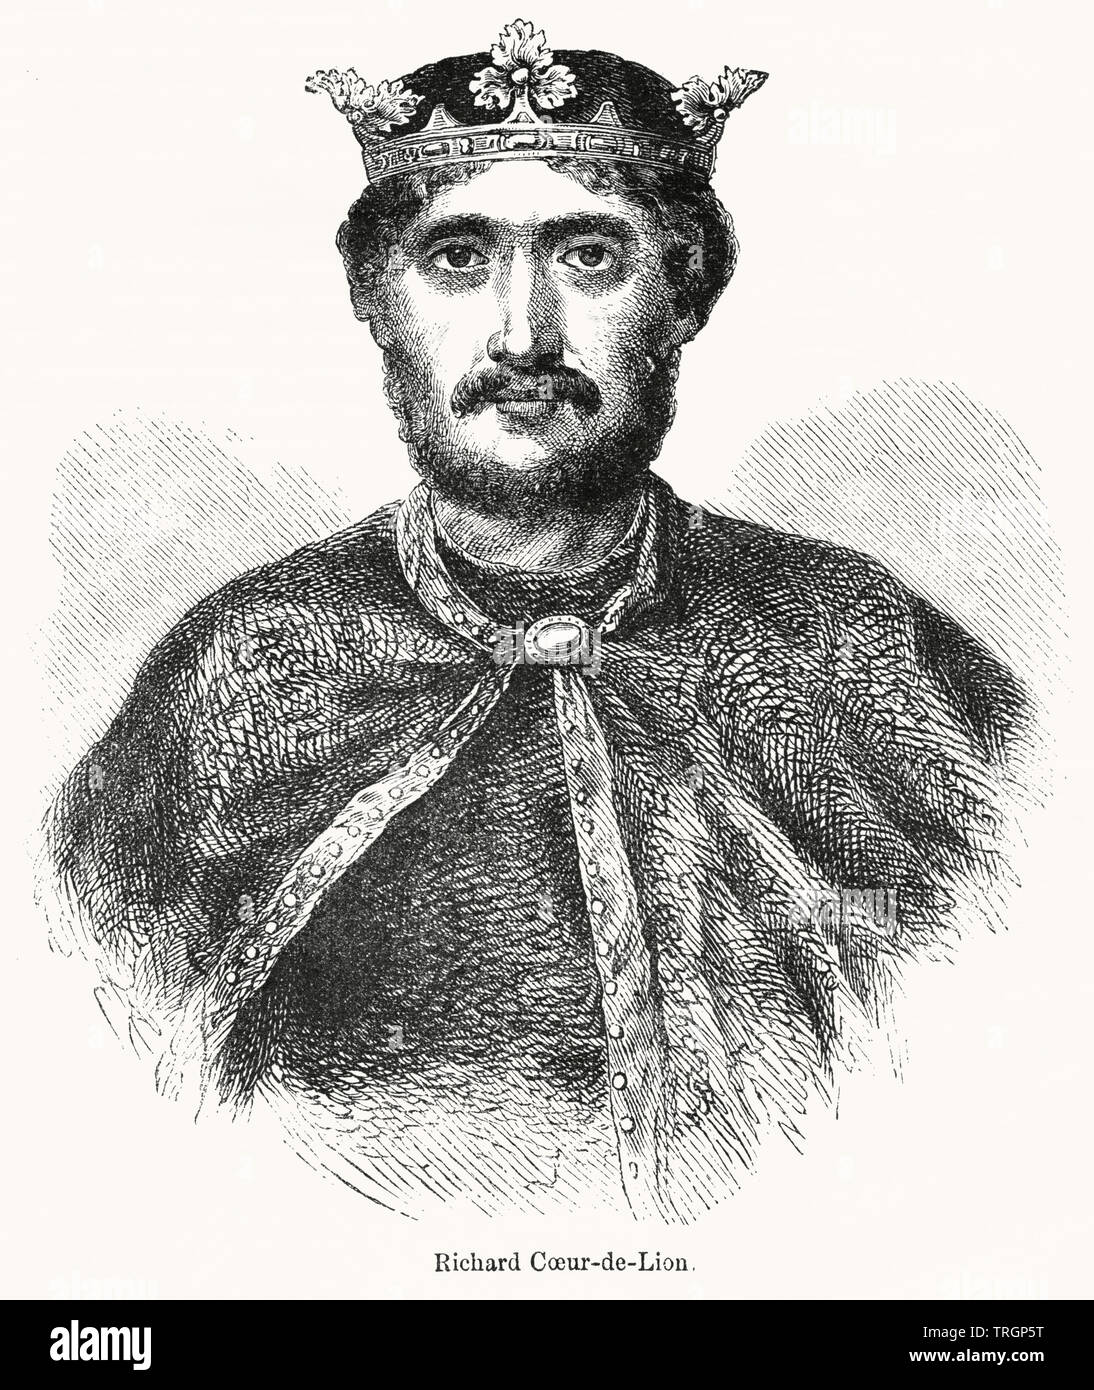 Richard Coeur-de-Lion, Illustration from John Cassell's Illustrated History of England, Vol. I from the earliest period to the reign of Edward the Fourth, Cassell, Petter and Galpin, 1857 Stock Photo